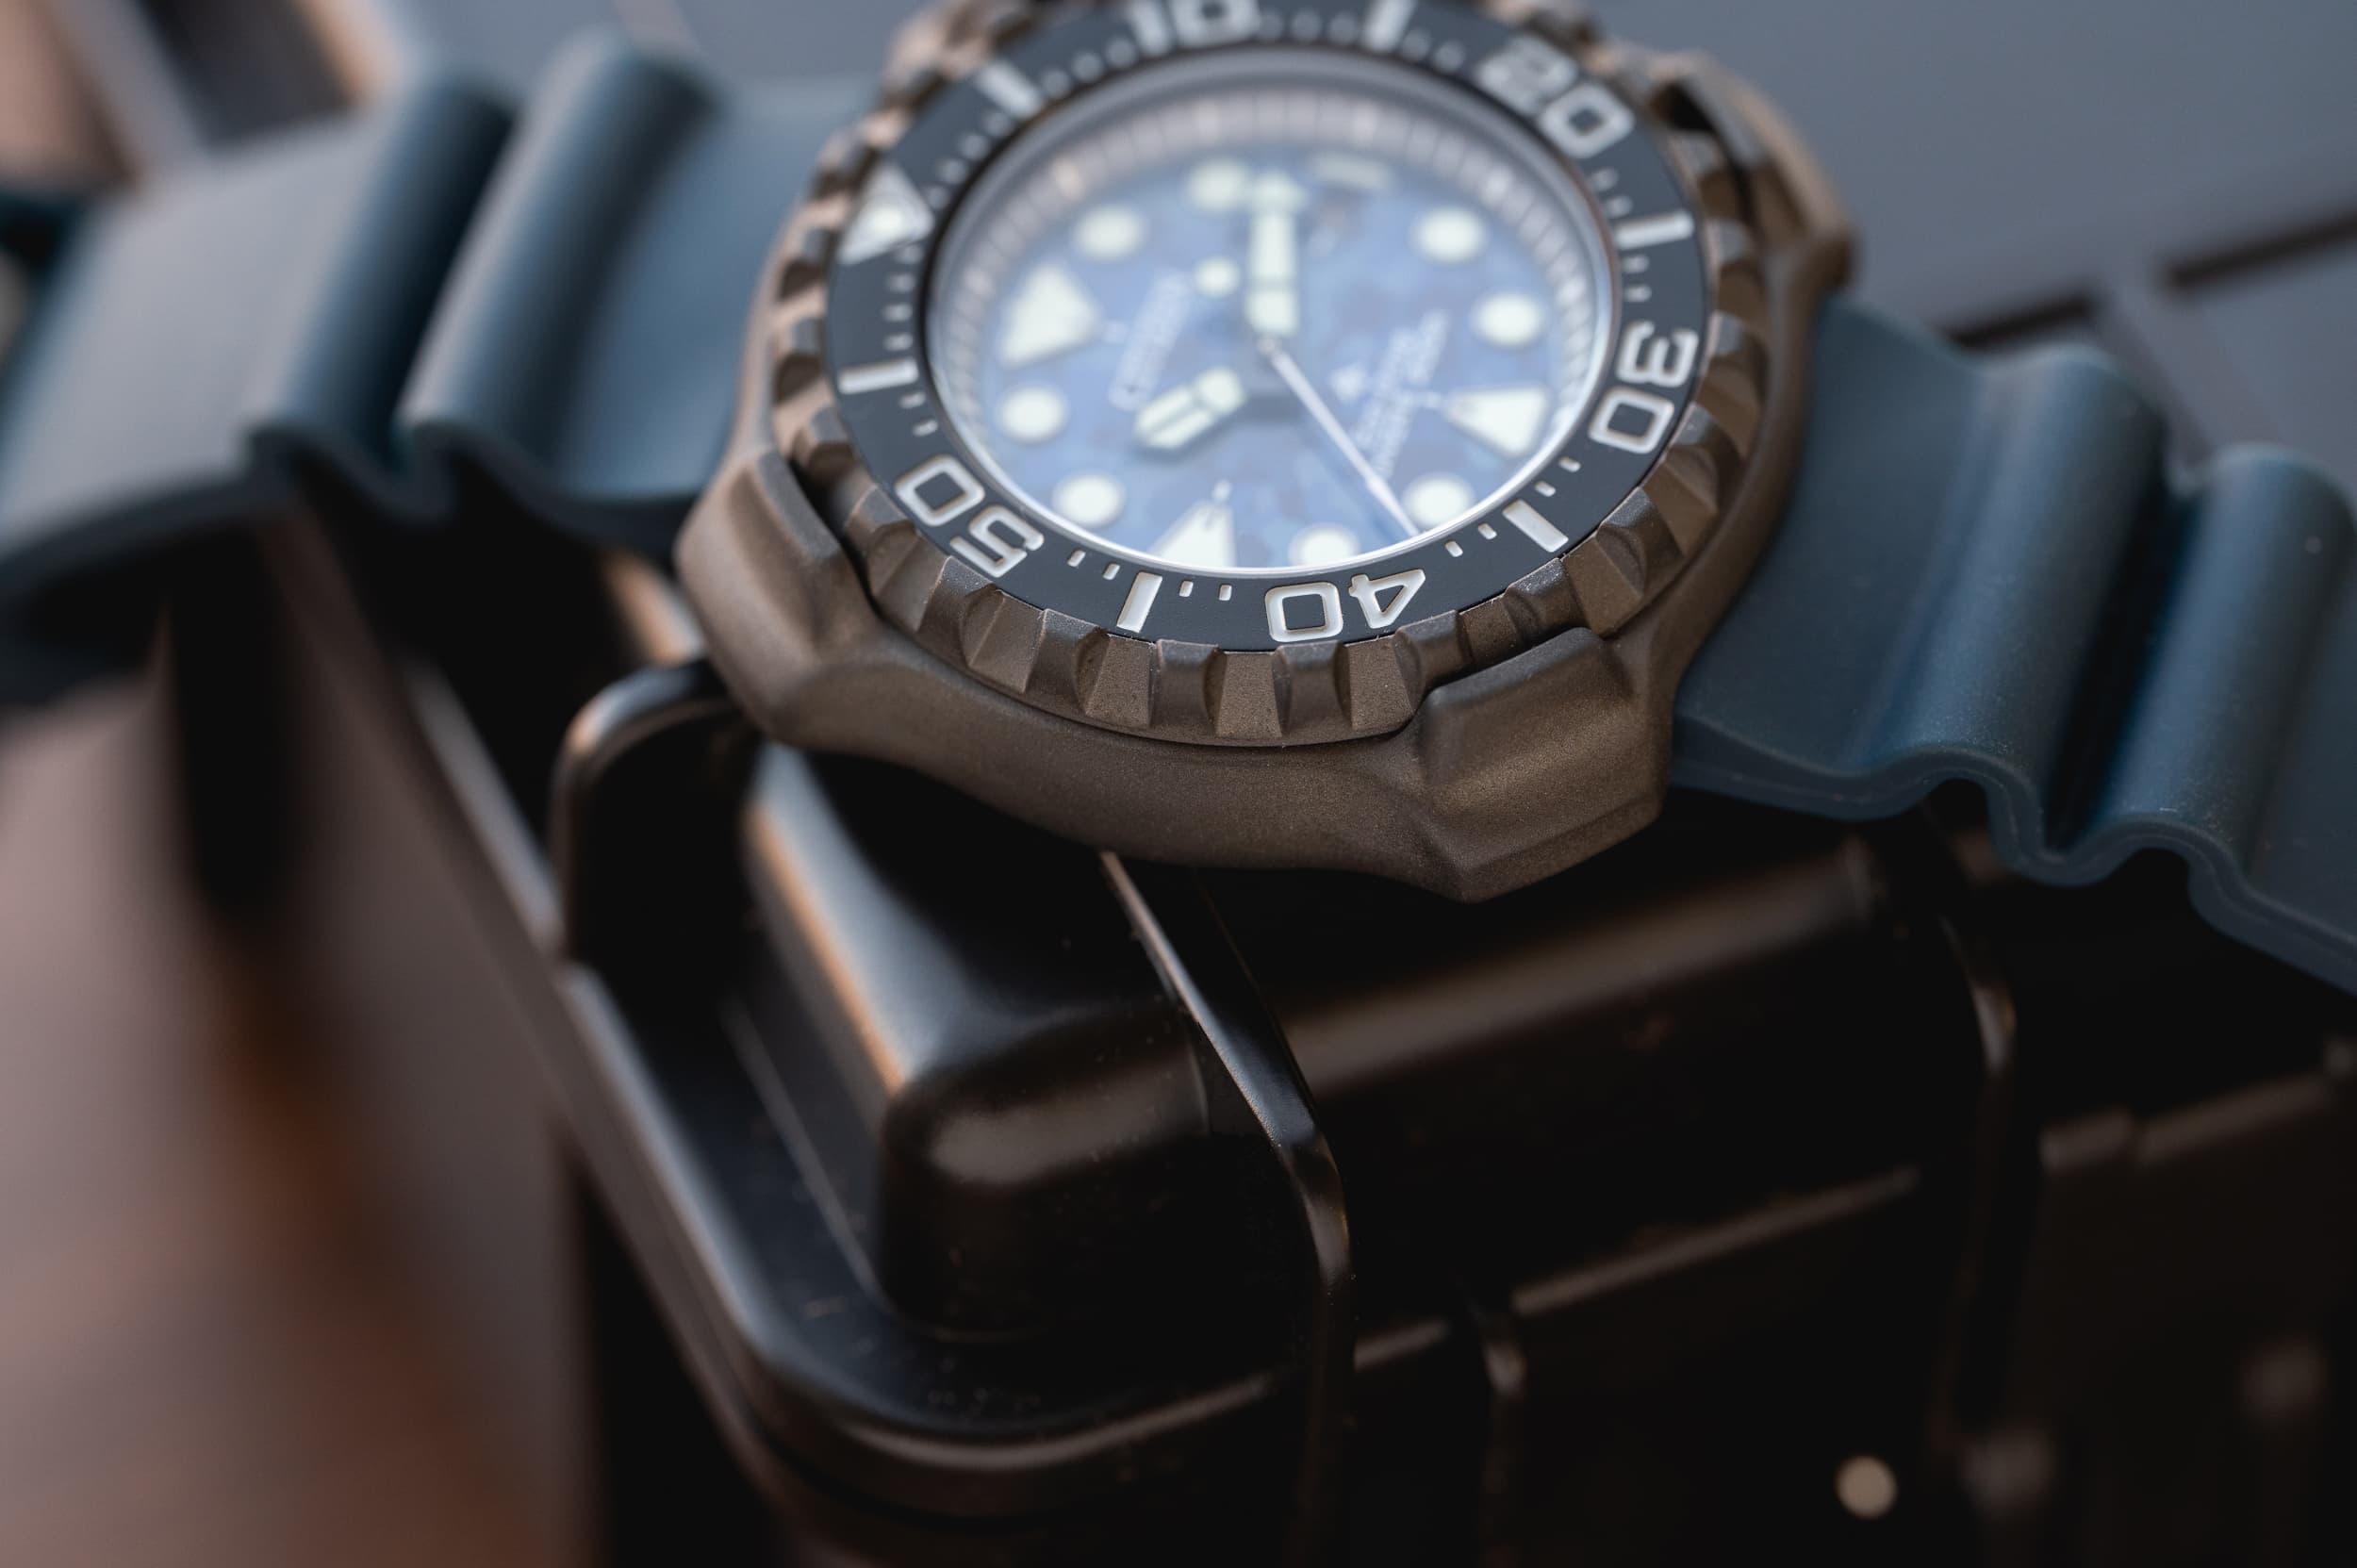 Promaster Assertive Citizen The Review: Diver Yet Worn - & BN0227-09L Approachable Wound